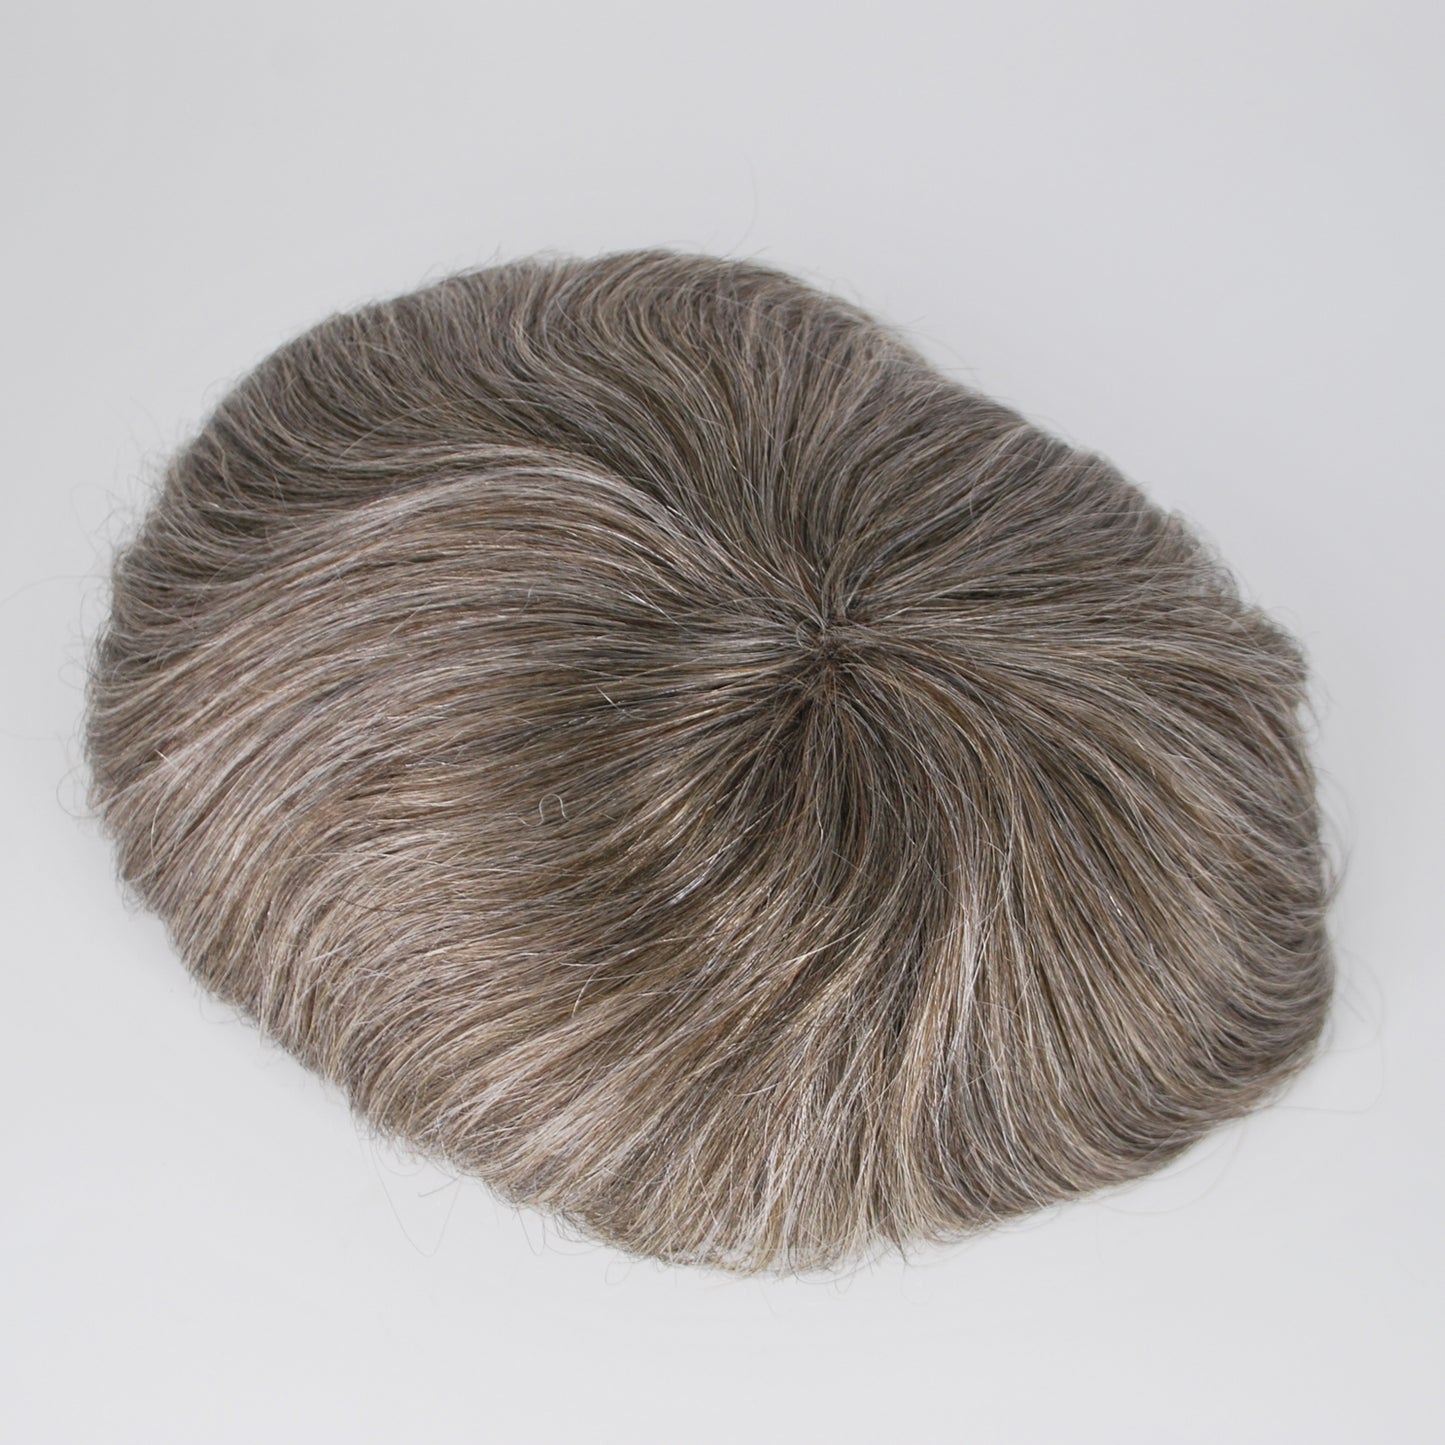 Clearance #3 brown grey mixed 50% toupee for men French lace with PU back and sides human hair men wig